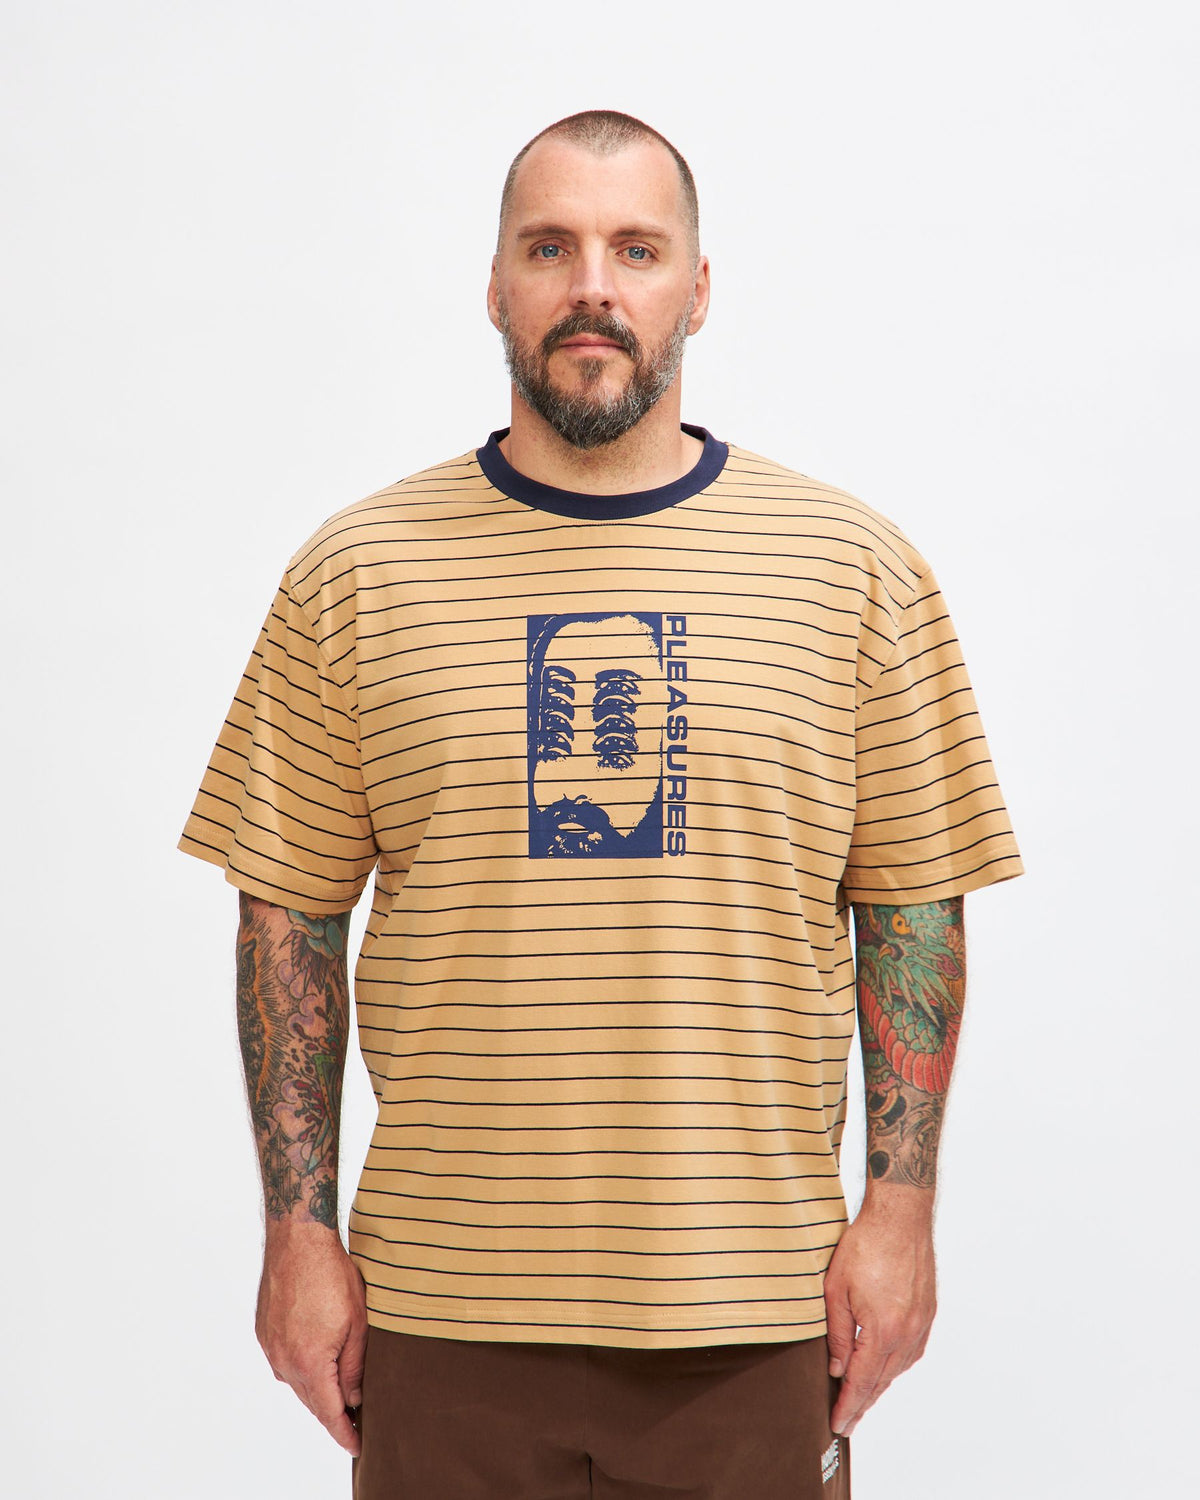 Foresight Striped Shirt in Tan